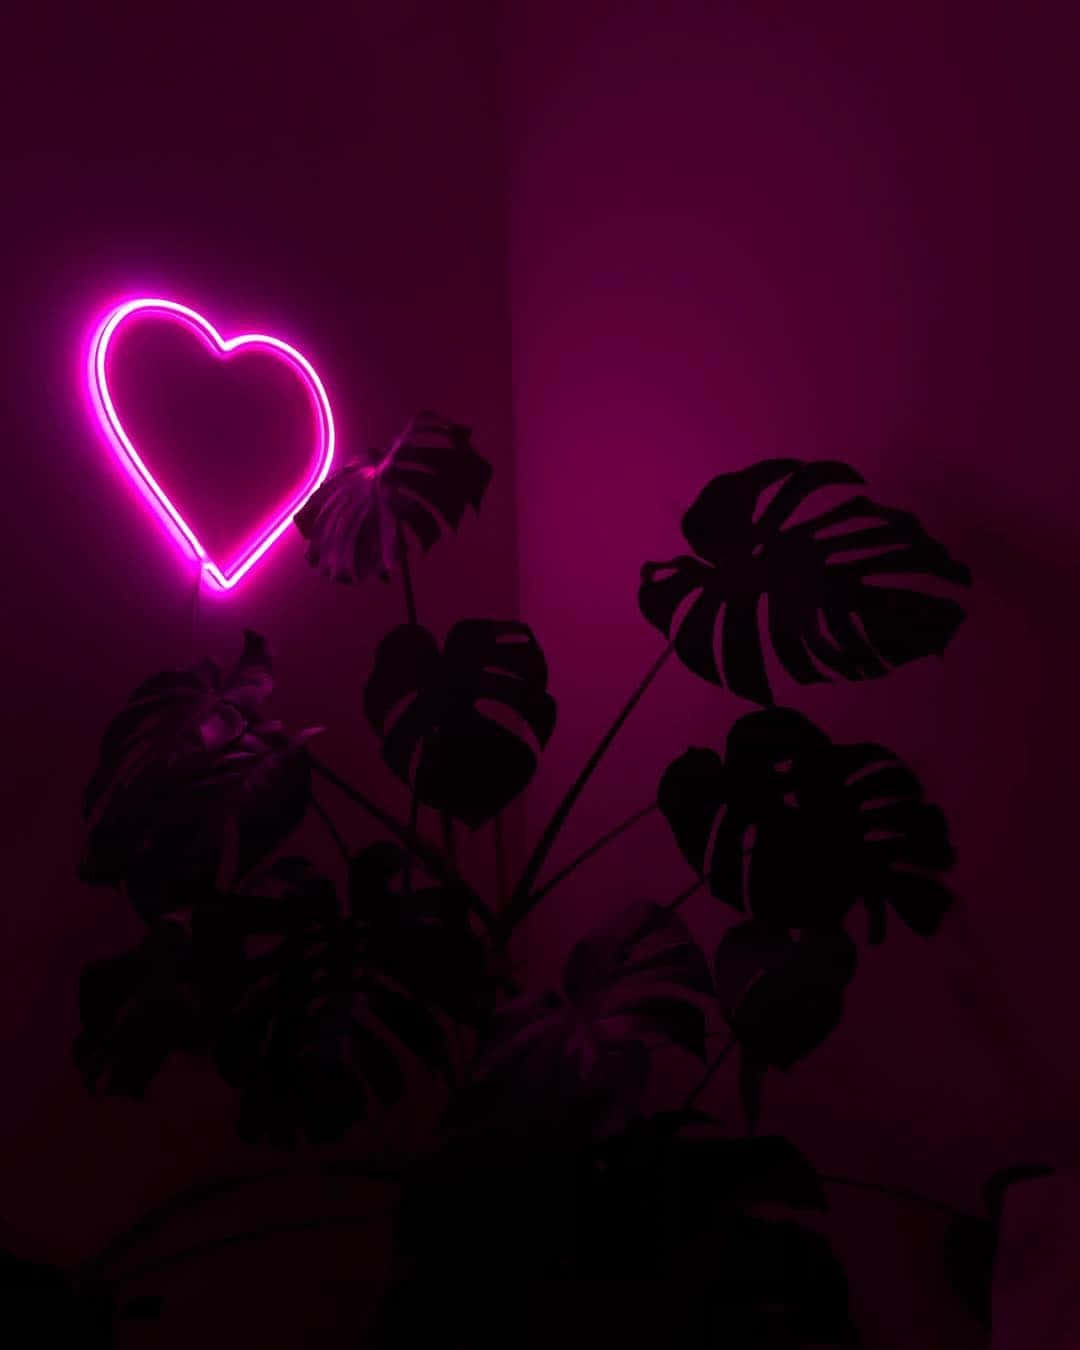 A Pink Heart Neon Sign In The Dark